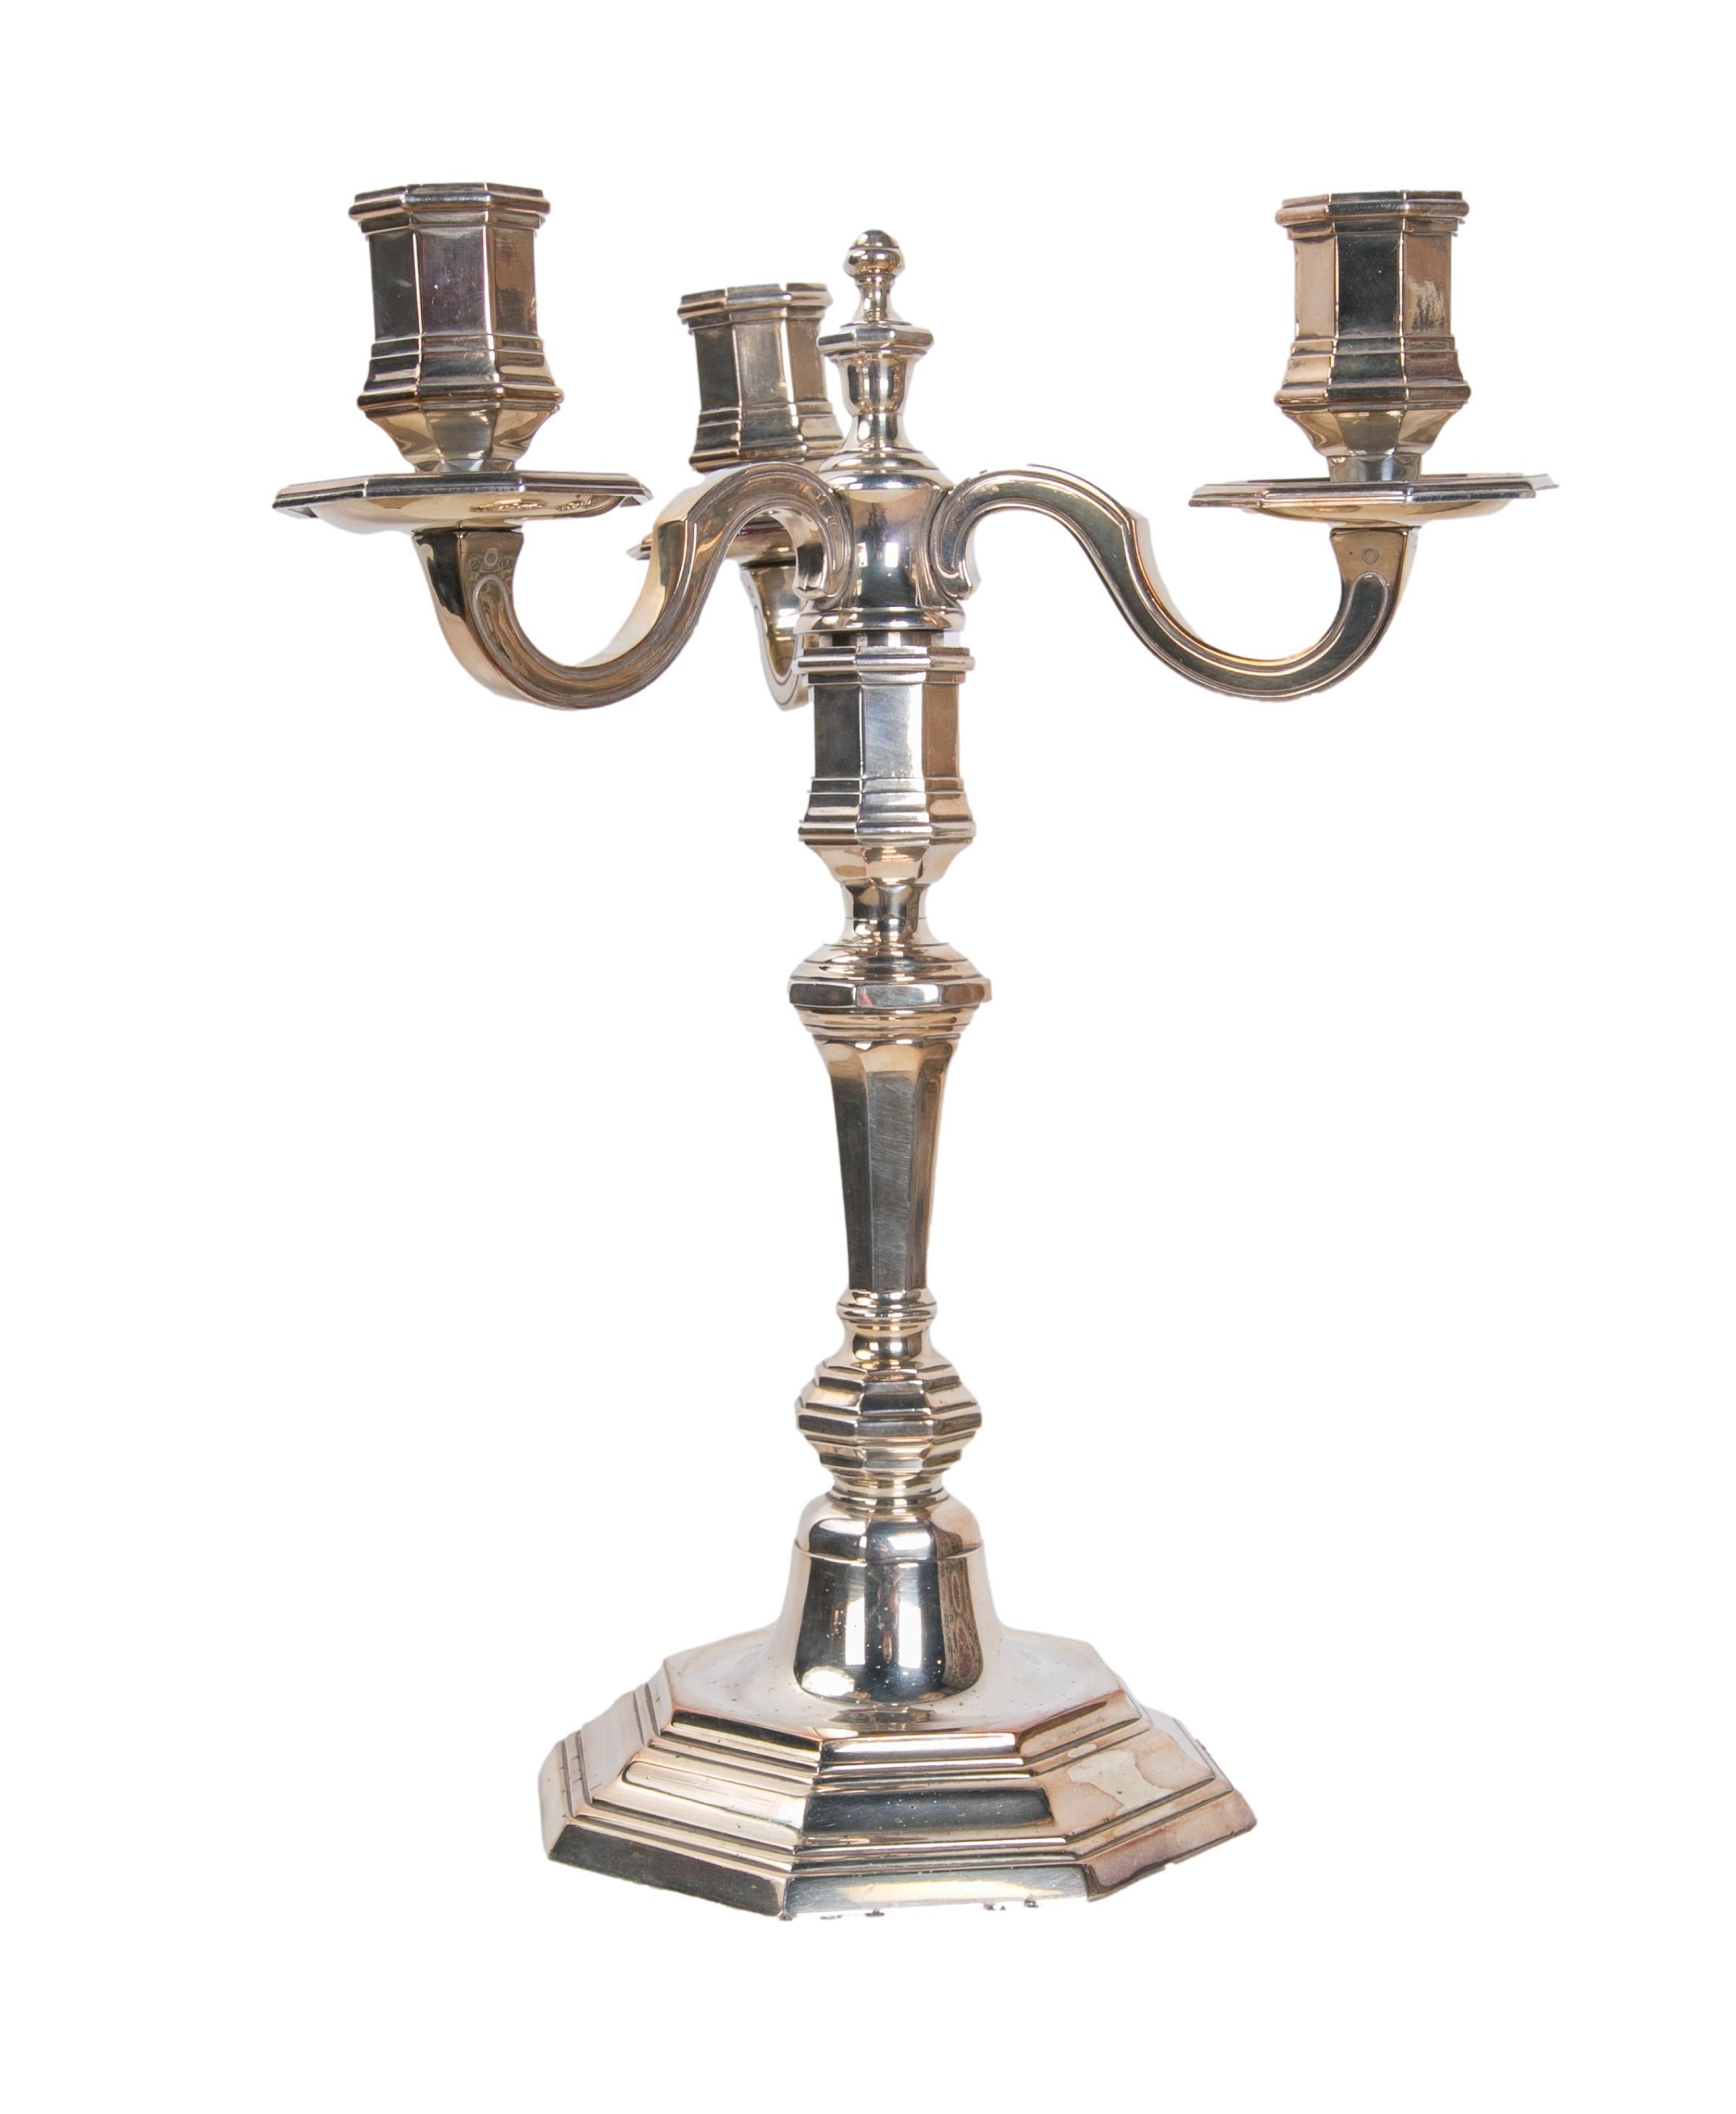 1980s French Silver Plated Metal Candlestick by Christofle France  For Sale 4